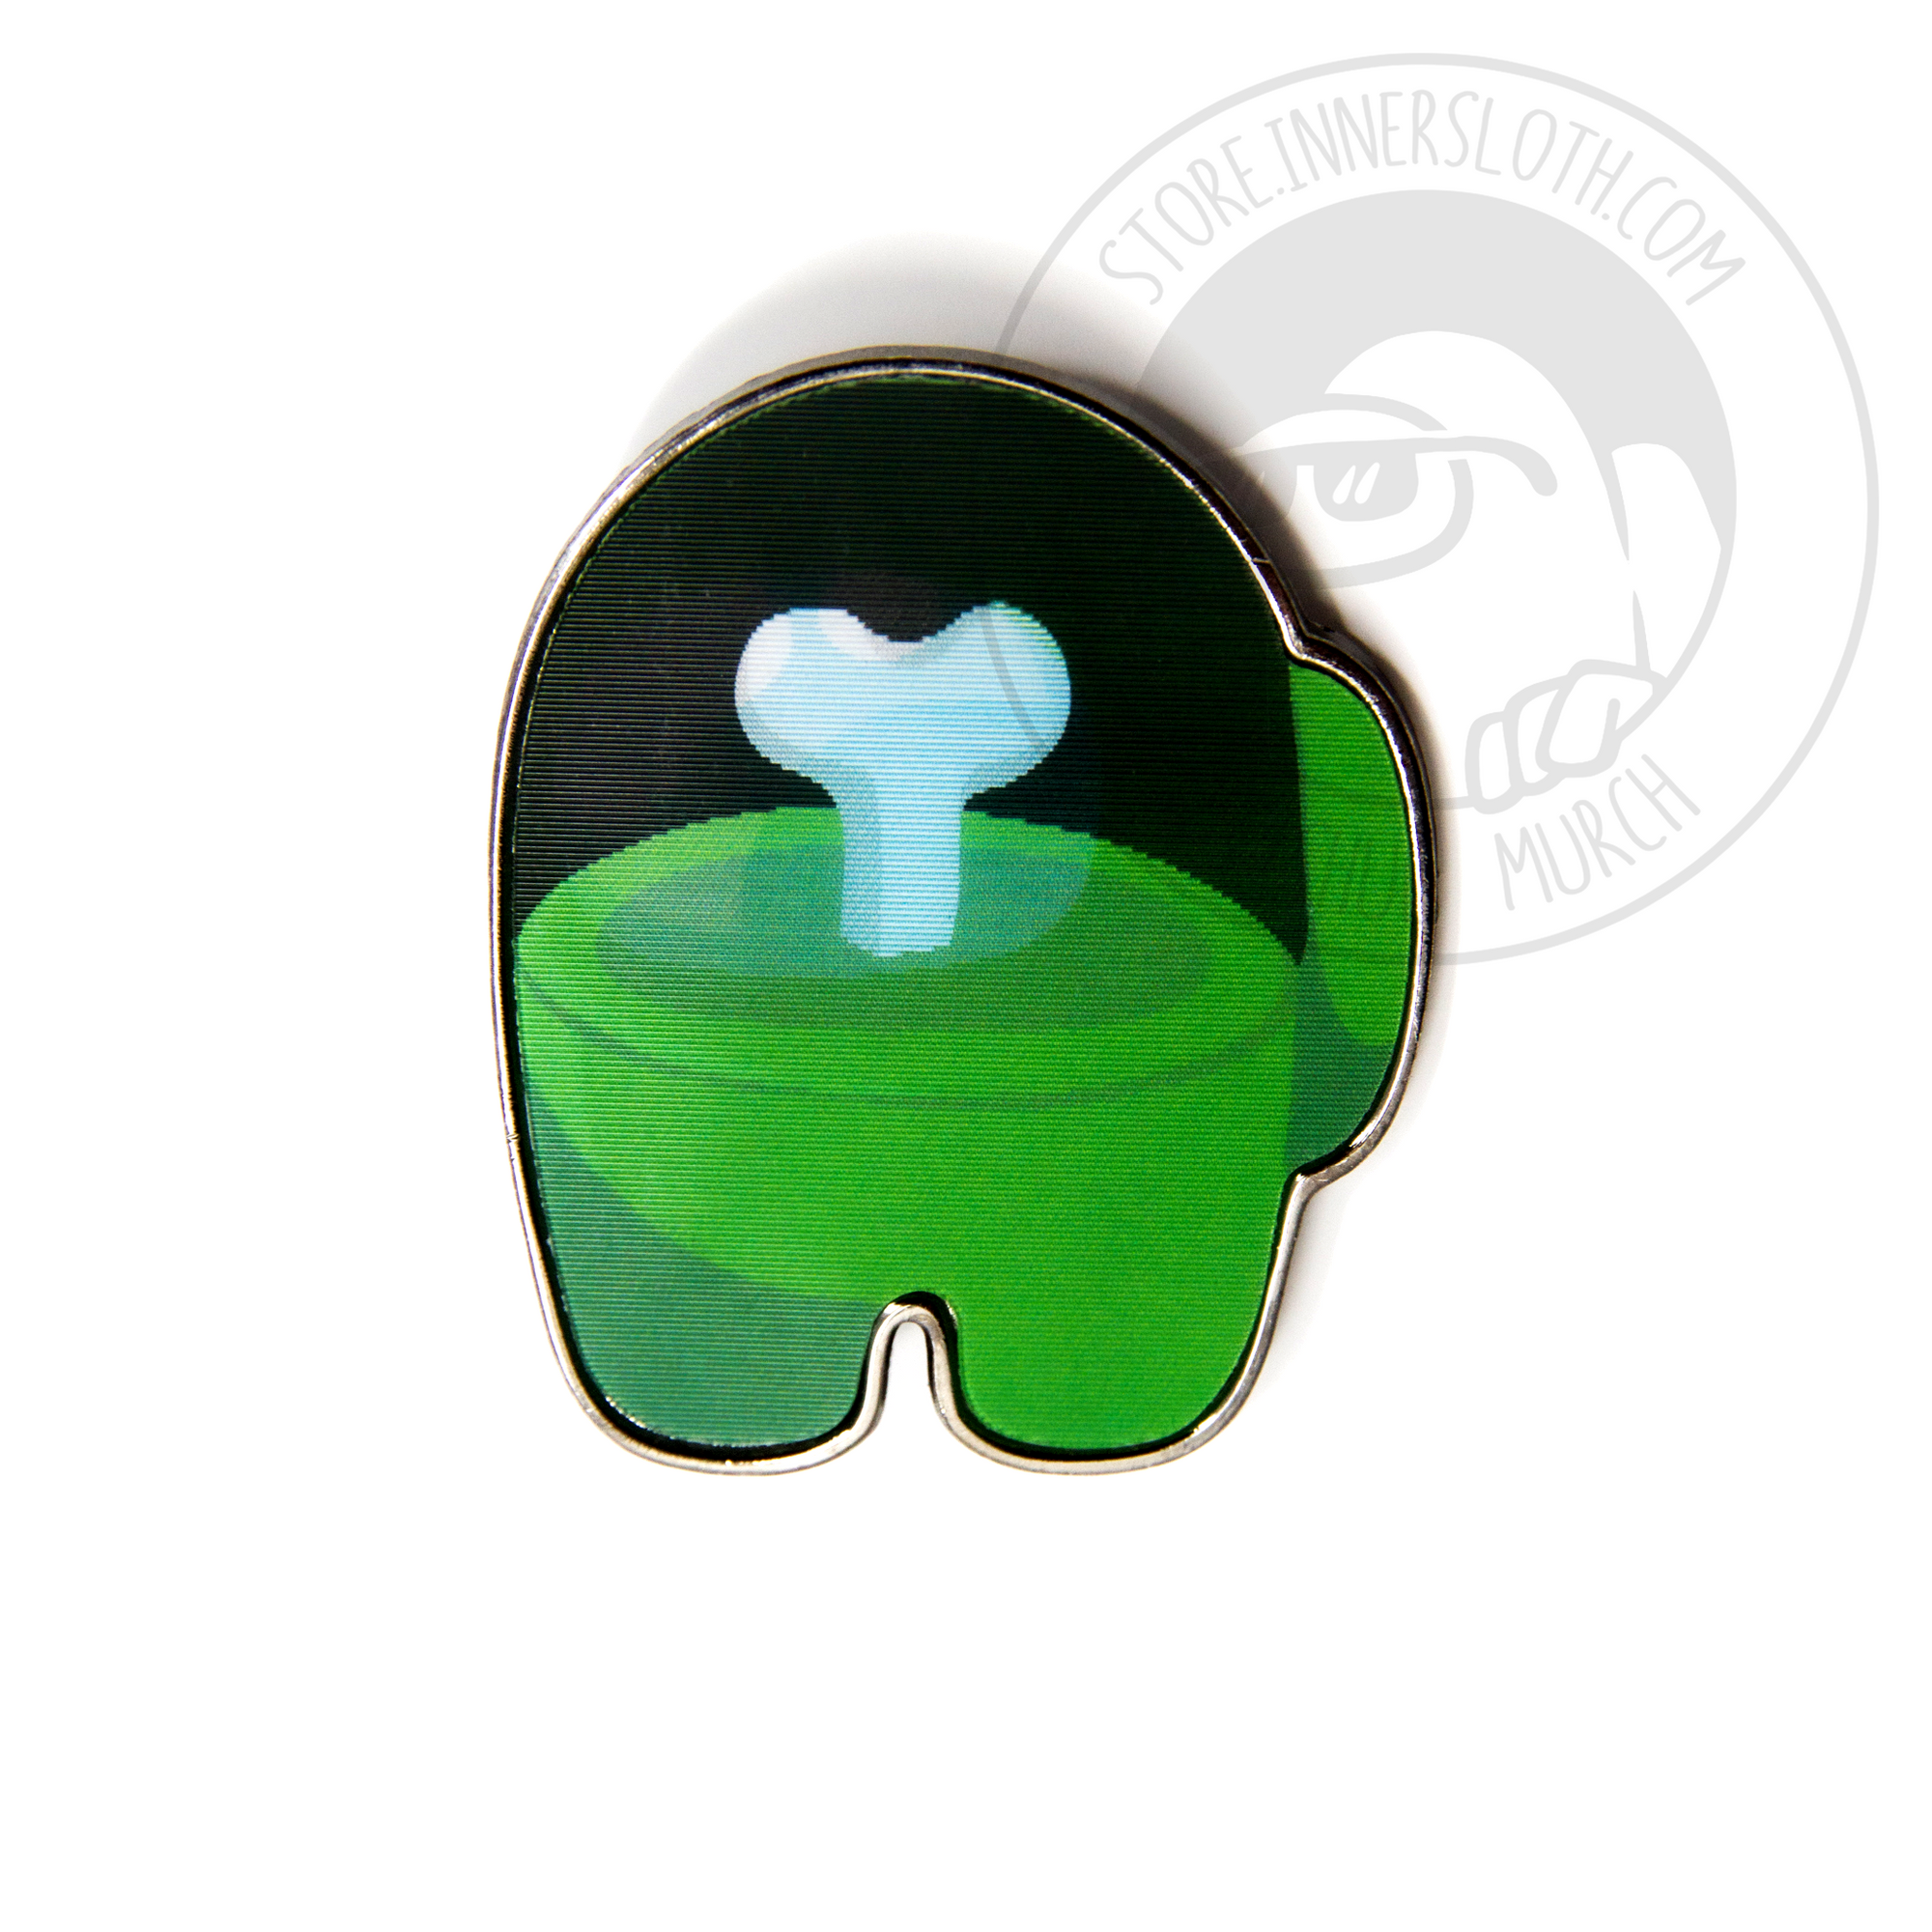 Among Us: Lenticular Impostor Pin - Green by Noble Demons - Innersloth Store